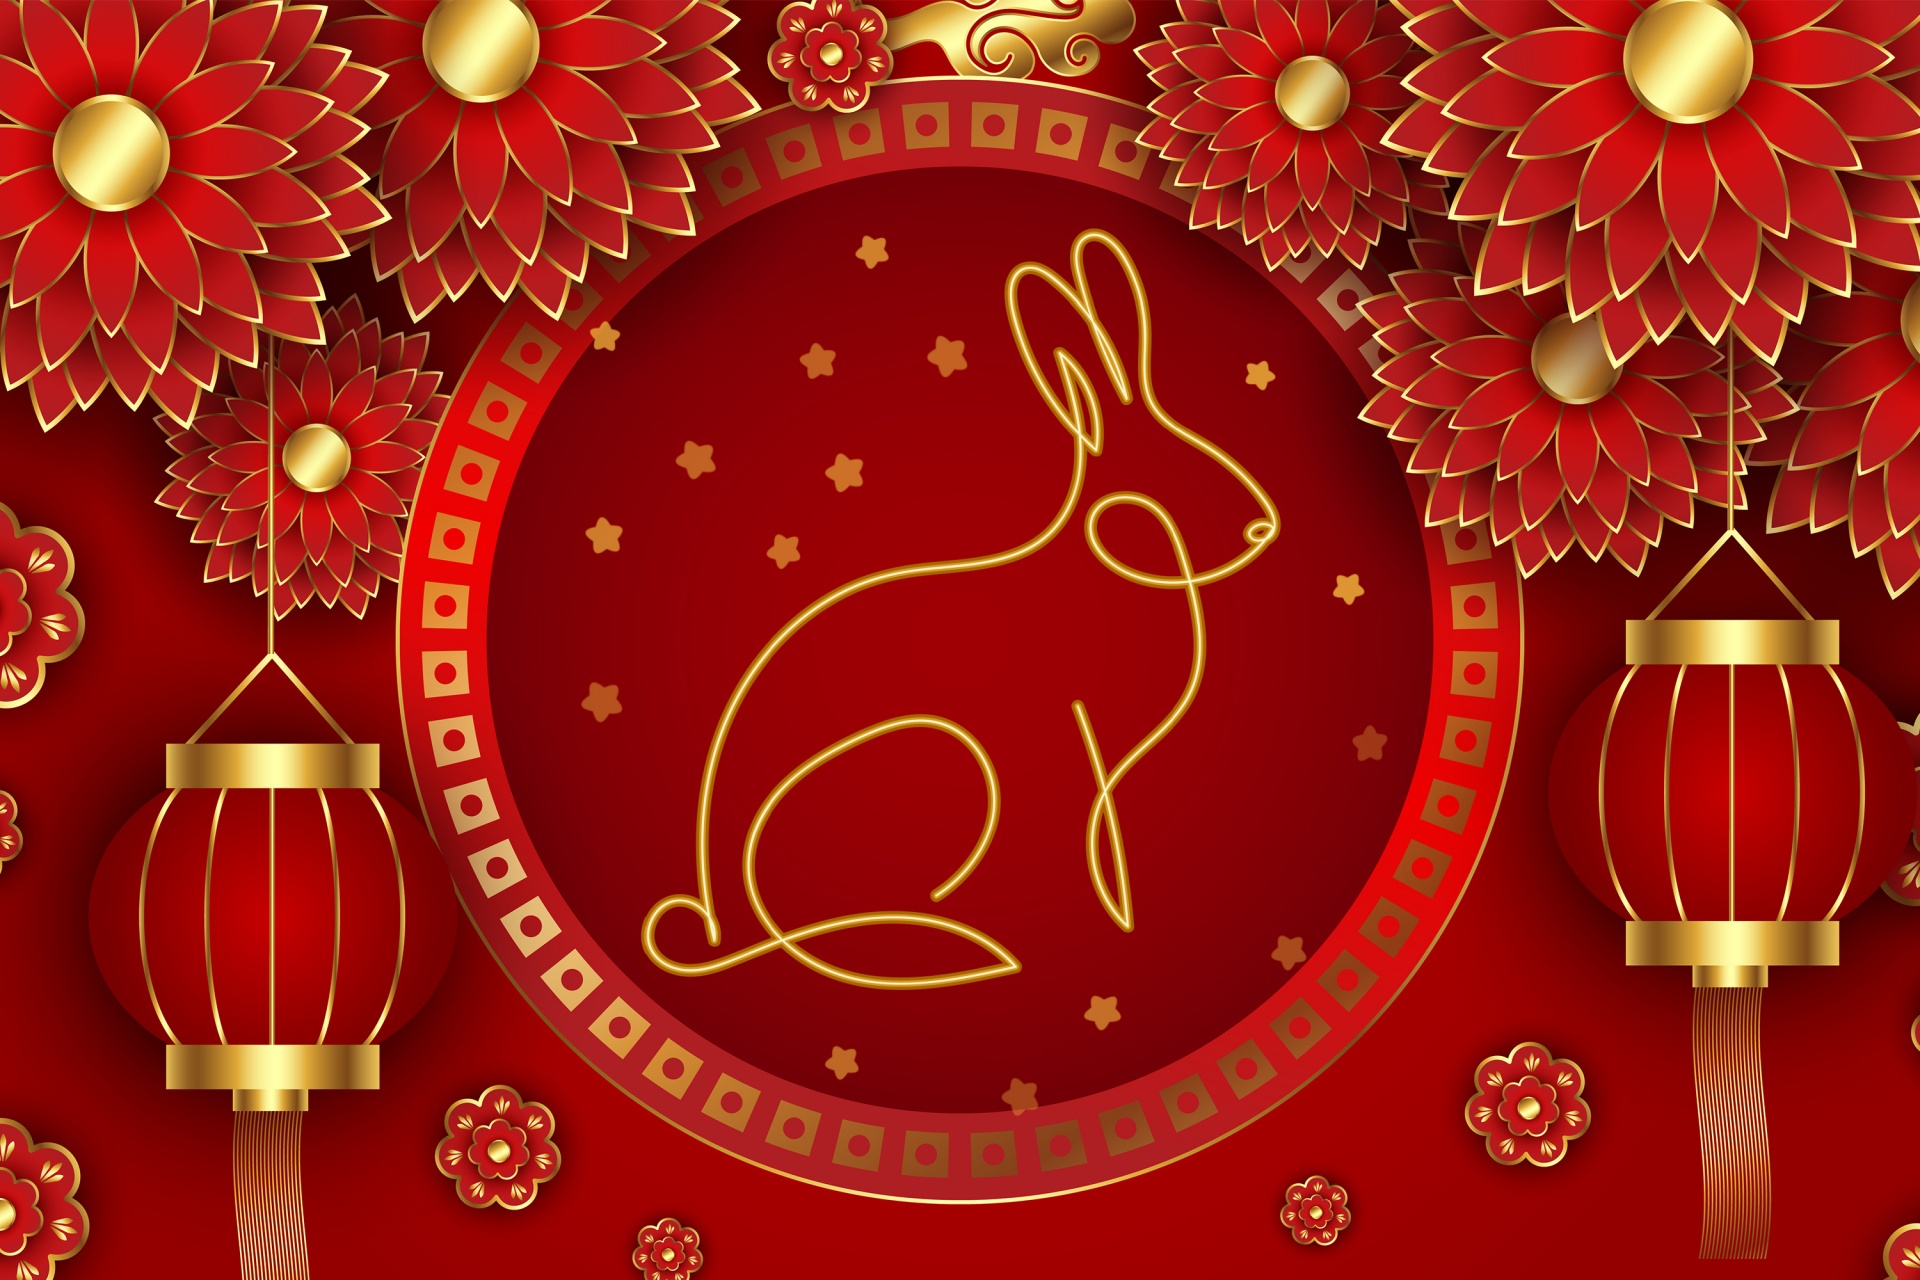 A stylized golden rabbit on a red background with Chinese lanterns